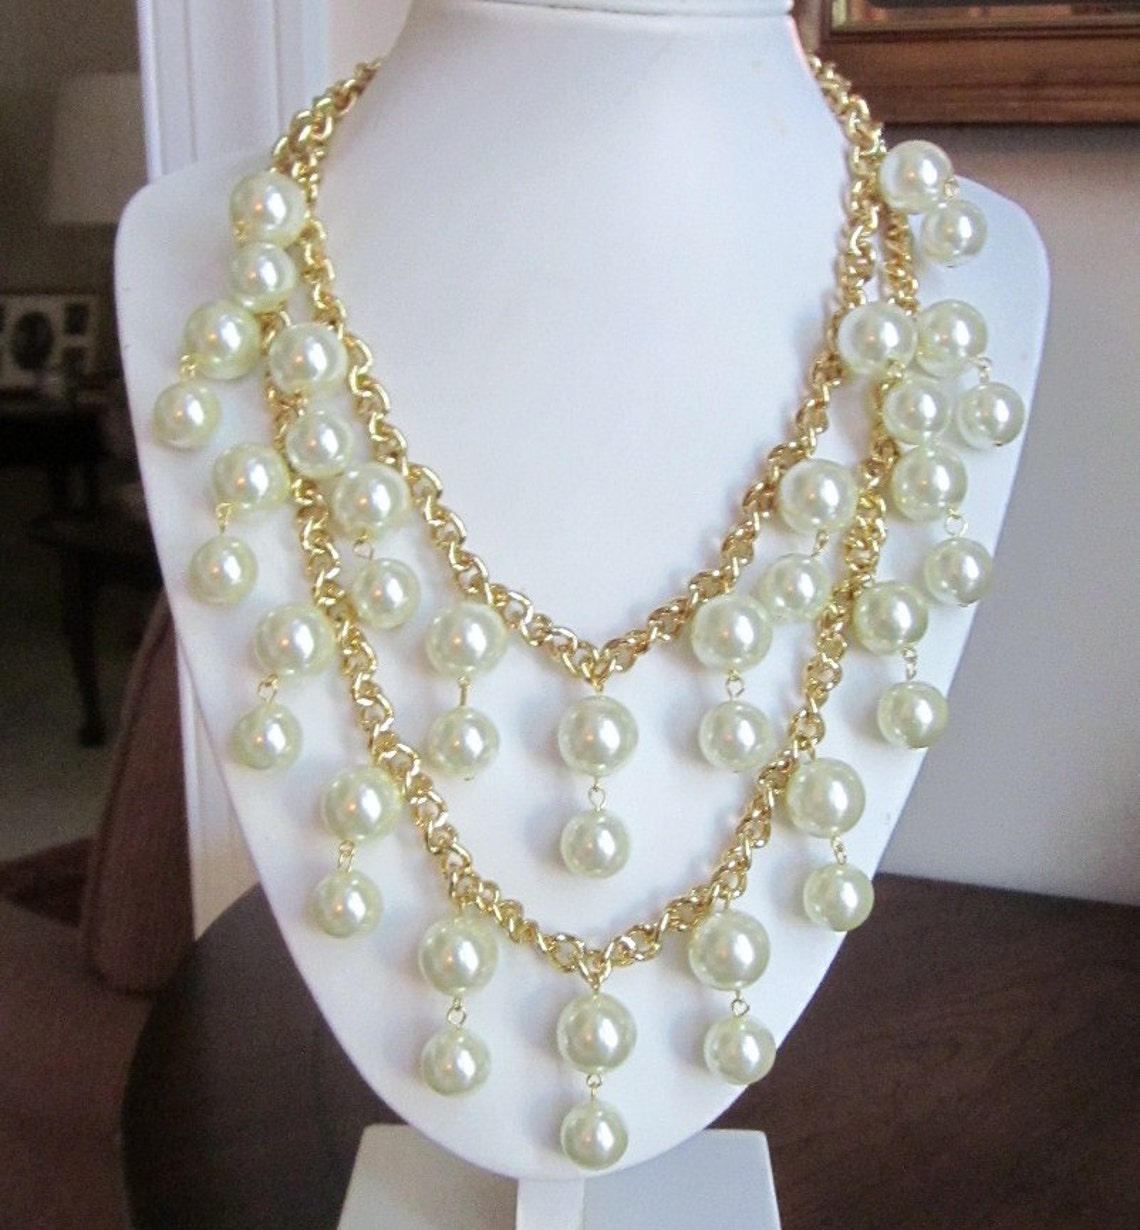 2 Broke Girls Necklace the caroline Gold and Pearl Necklace inspired by ...